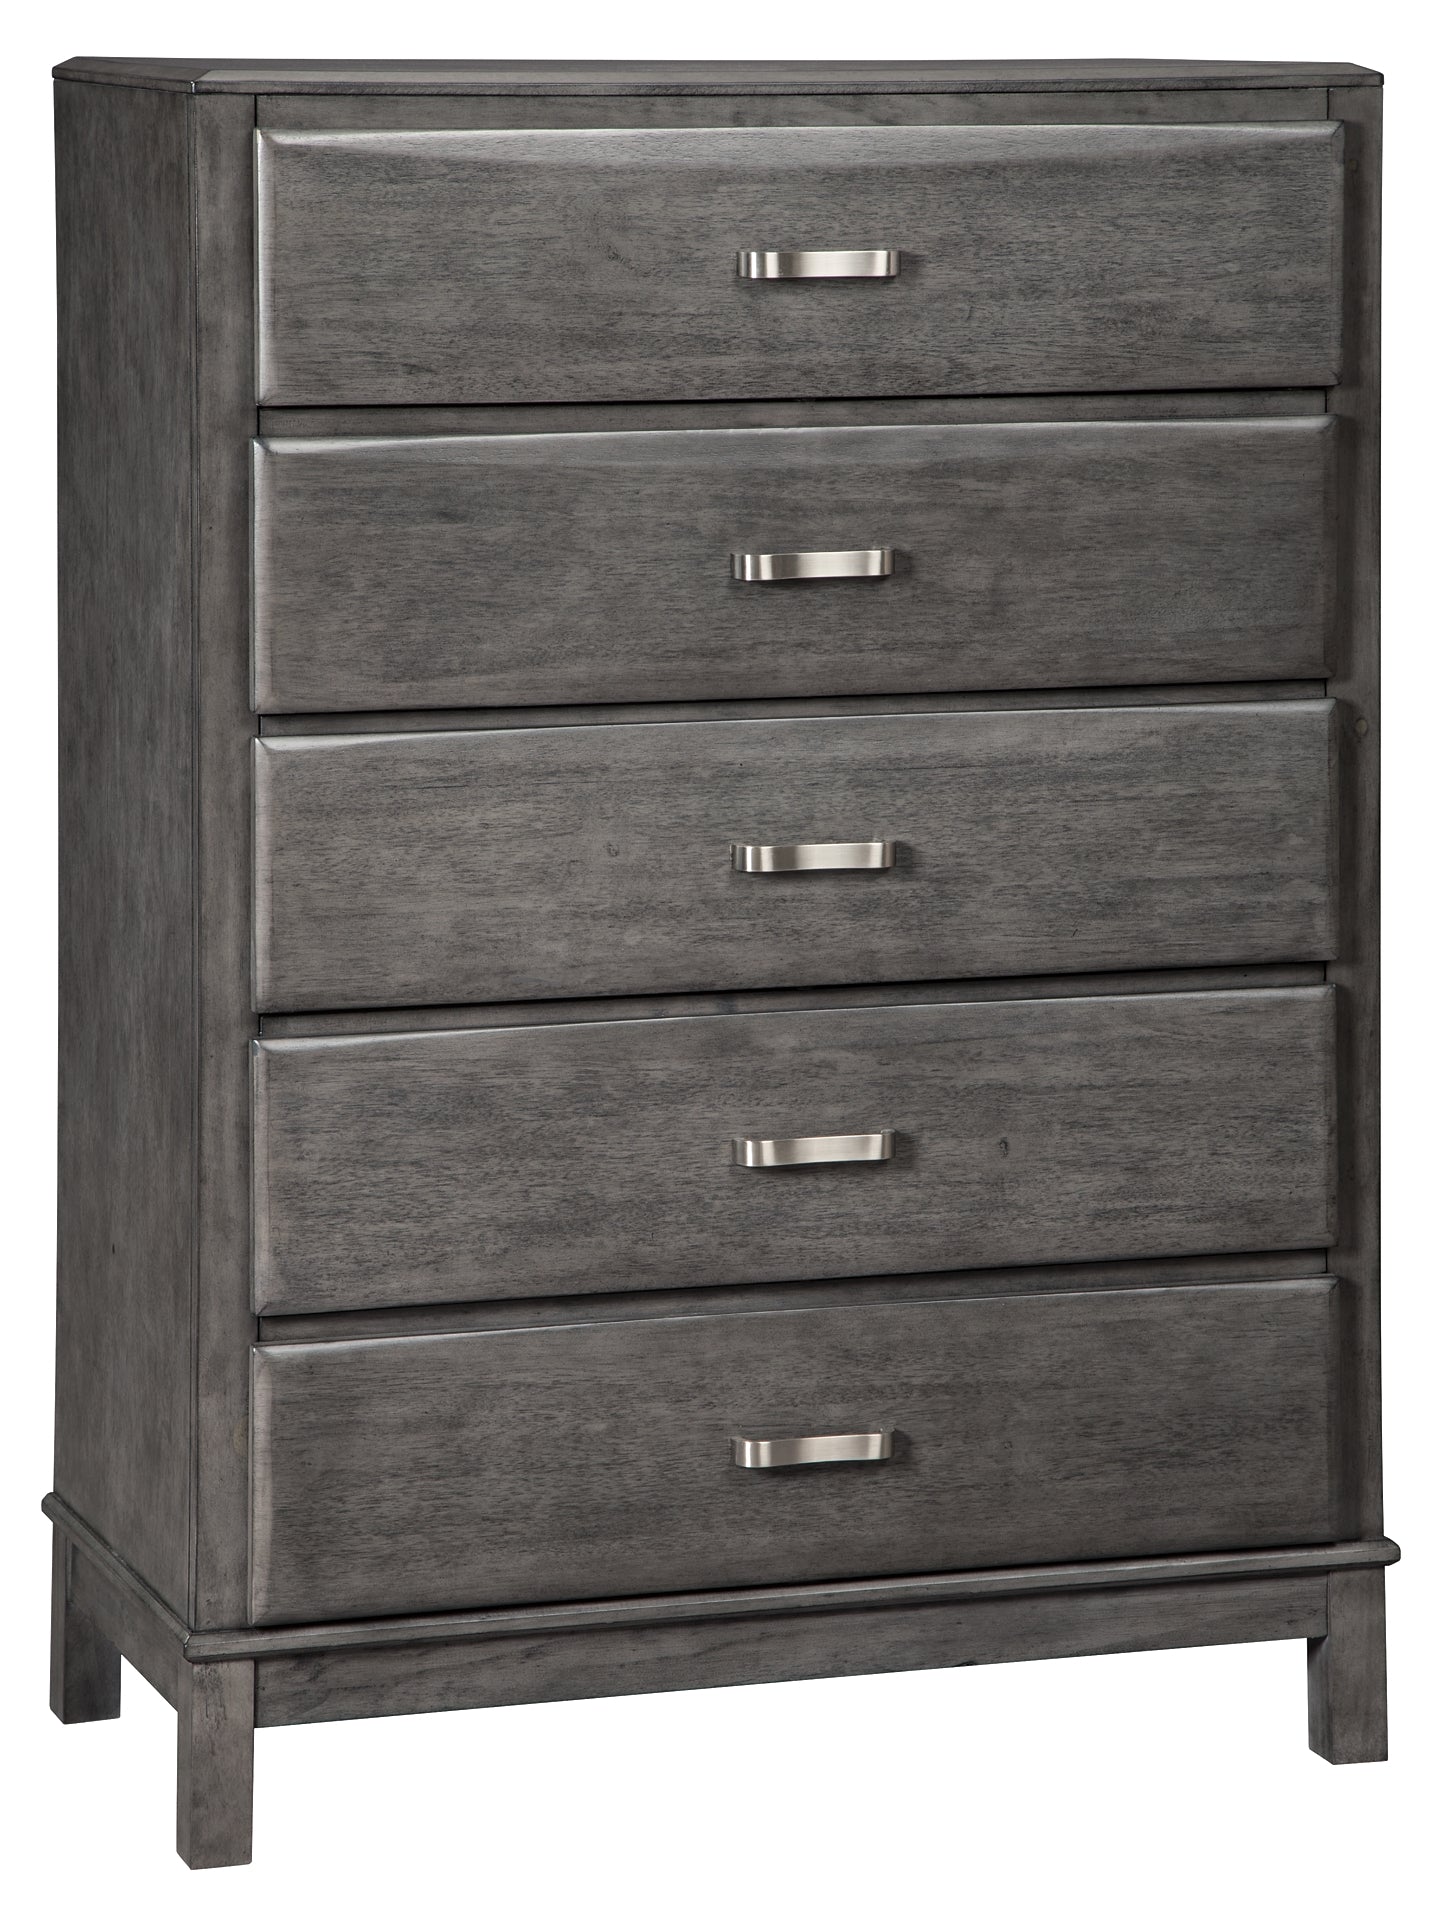 Caitbrook Five Drawer Chest